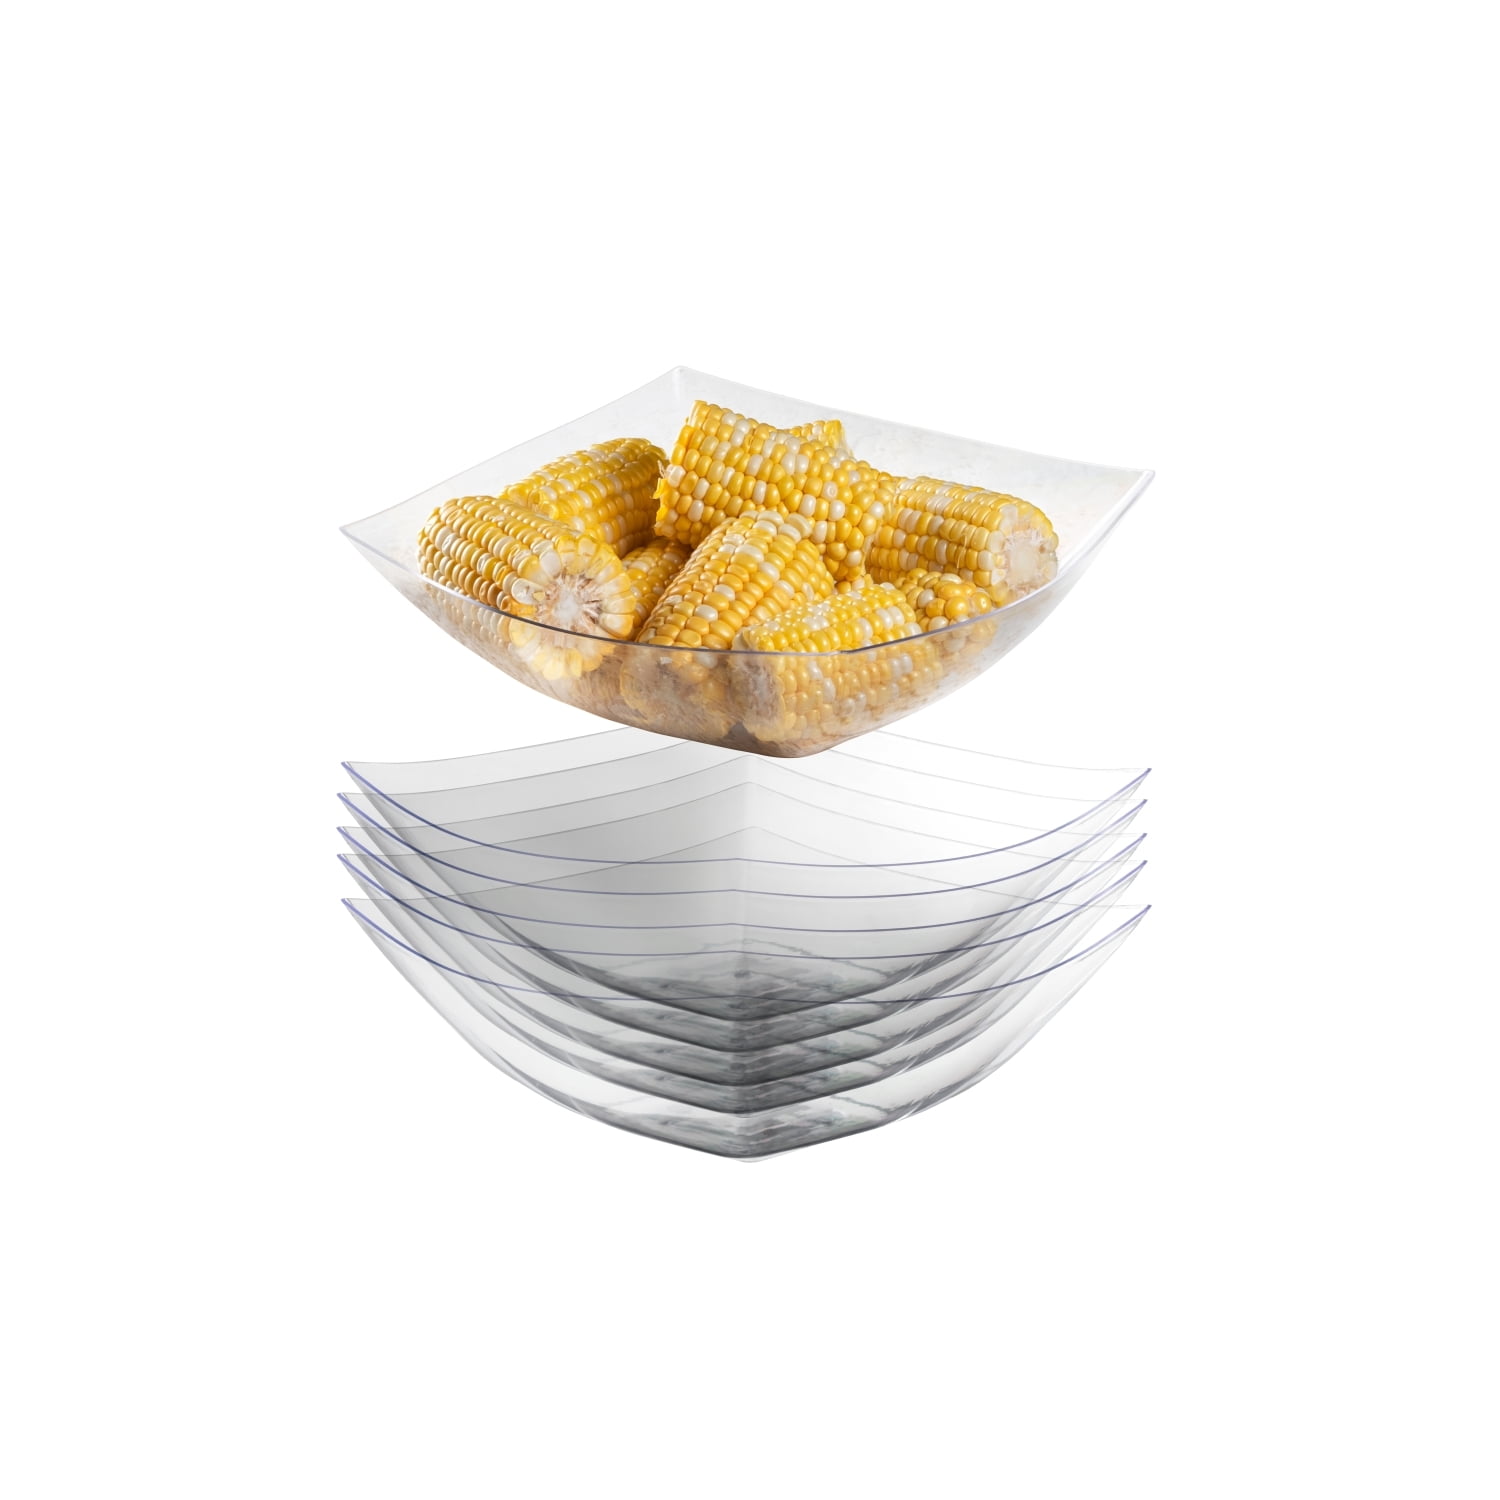 Clear Plastic Square Serving Bowl - 3 Pack - Lids (128 oz. Bowl) 1 Count - Luxury Disposable Tableware for Wedding's - Posh Setting